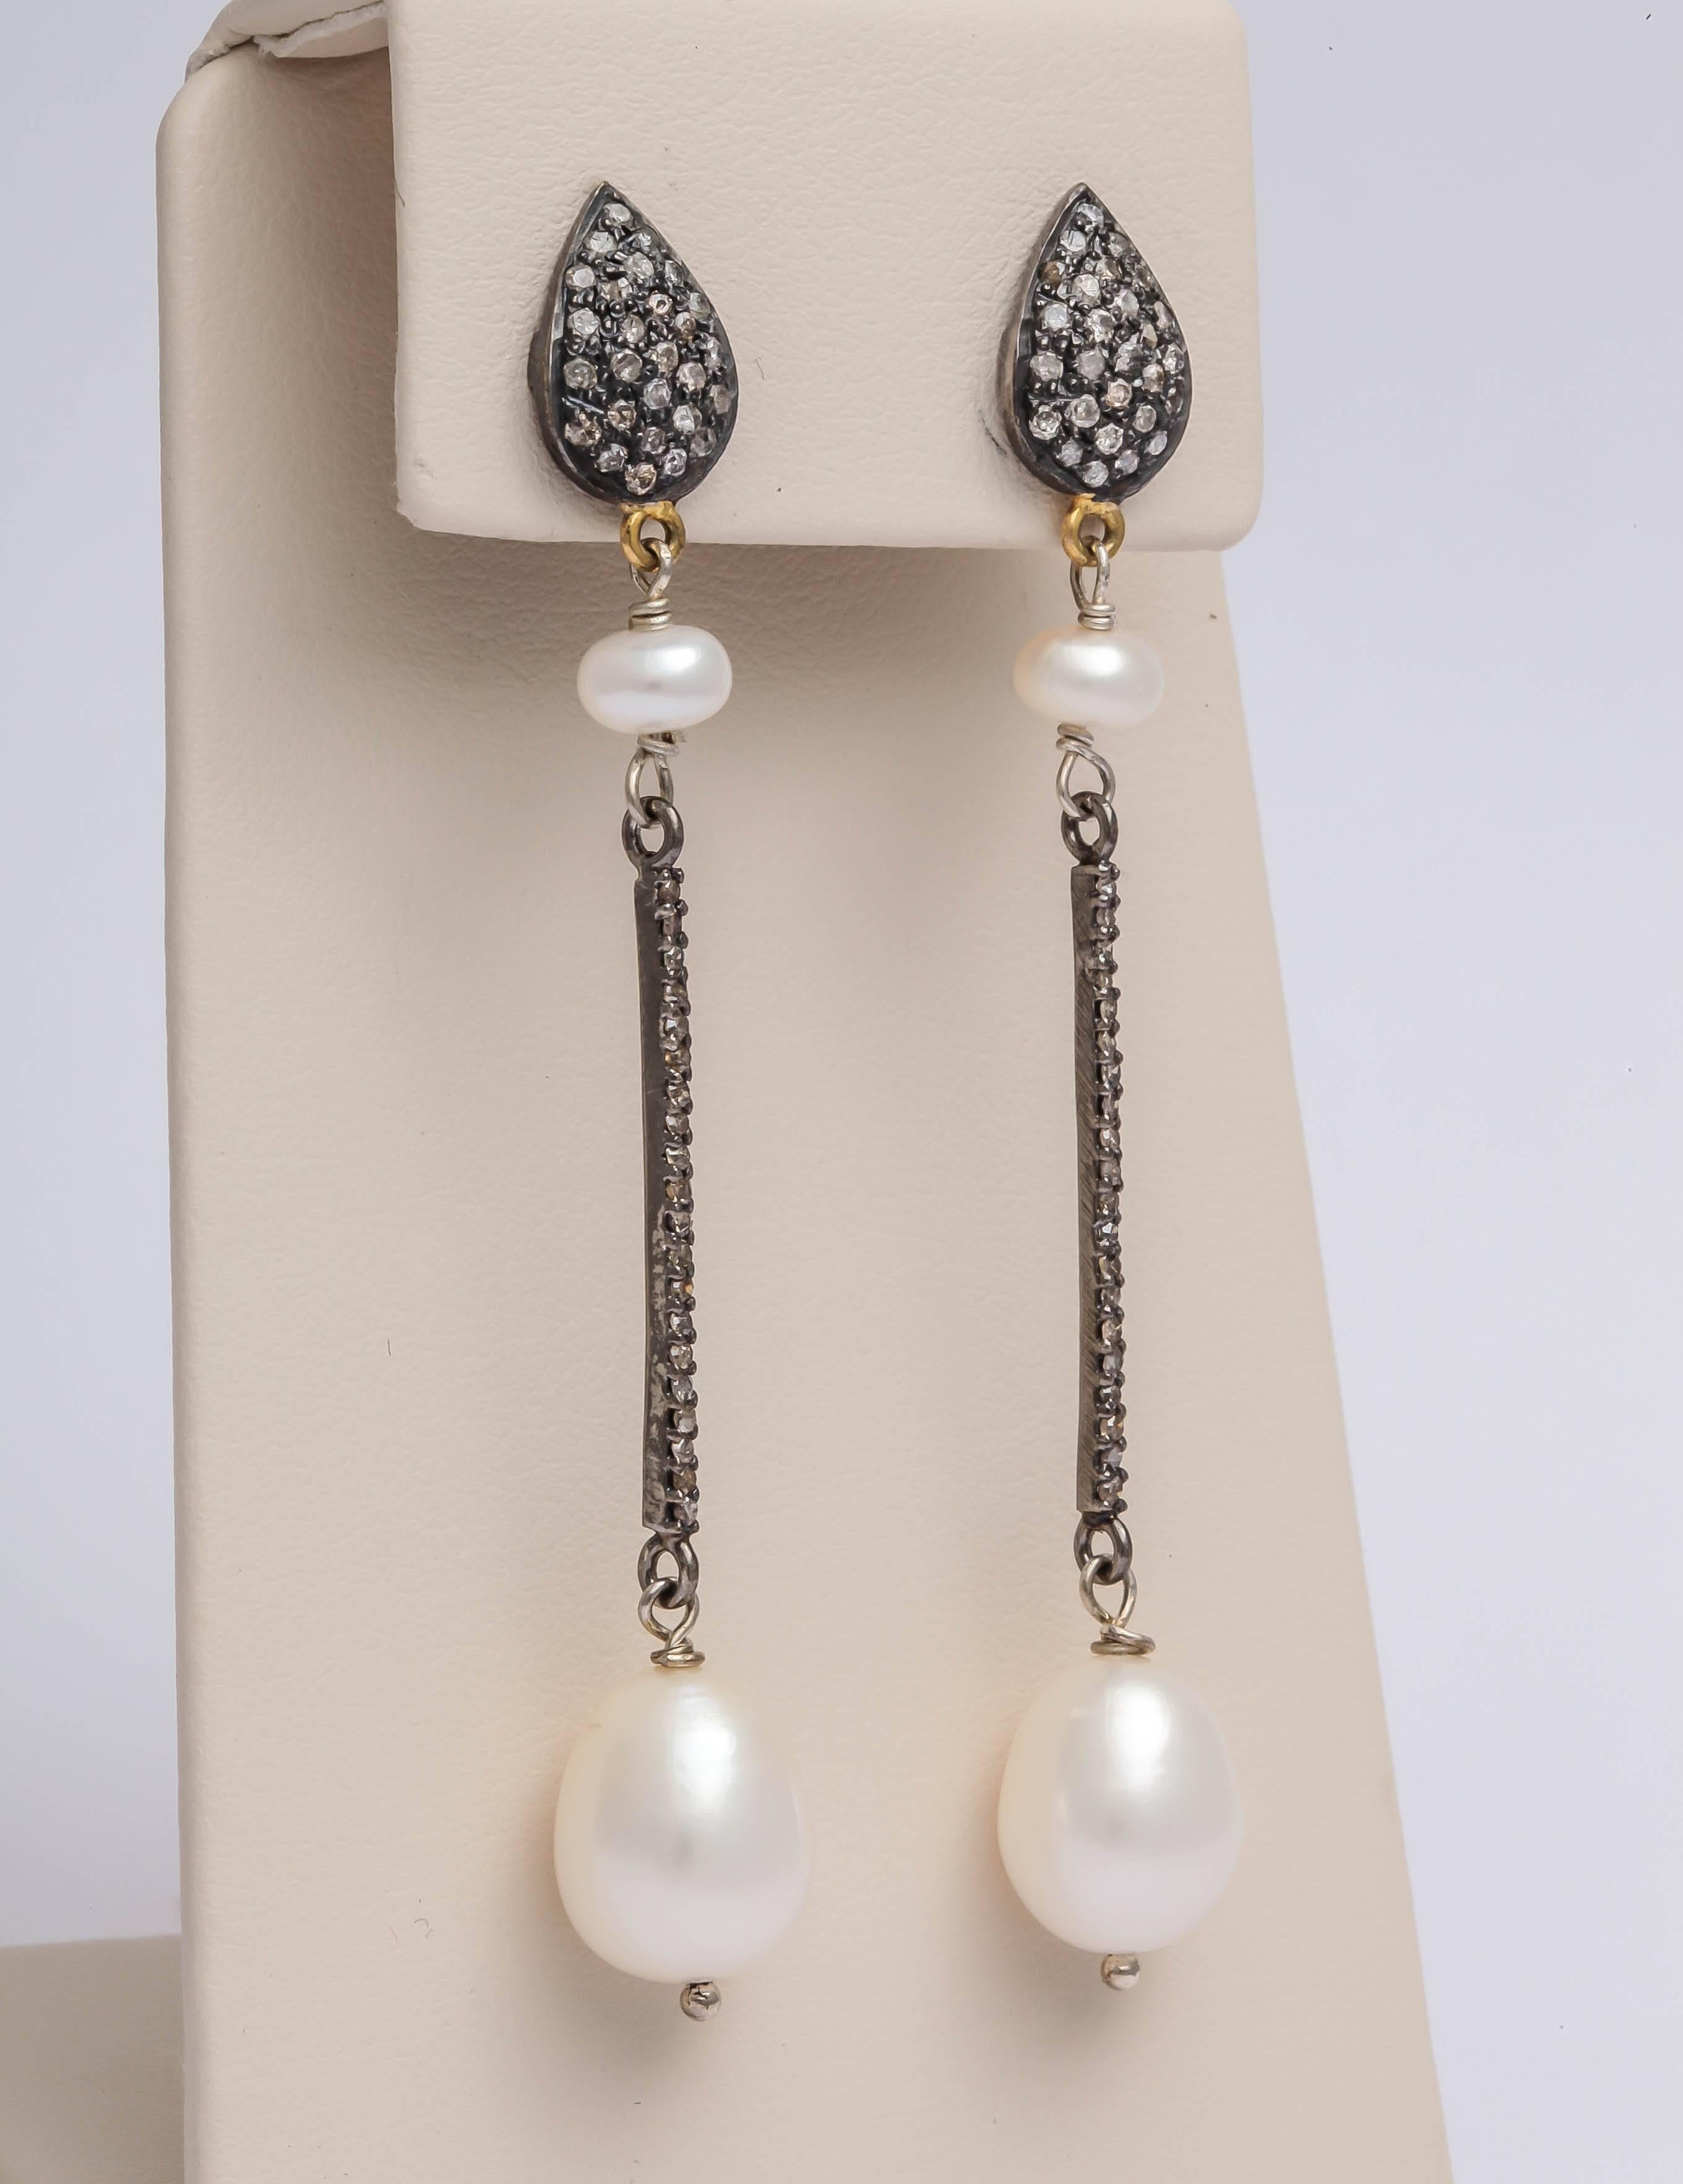 The top of the earring is silver, 14 kt gold and diamonds. It is connected with a pearl that is then connected to a long straight bar of diamonds in silver. The earrings is finished with a 10 x 12 mm fresh water pearl. Flowing and graceful, this